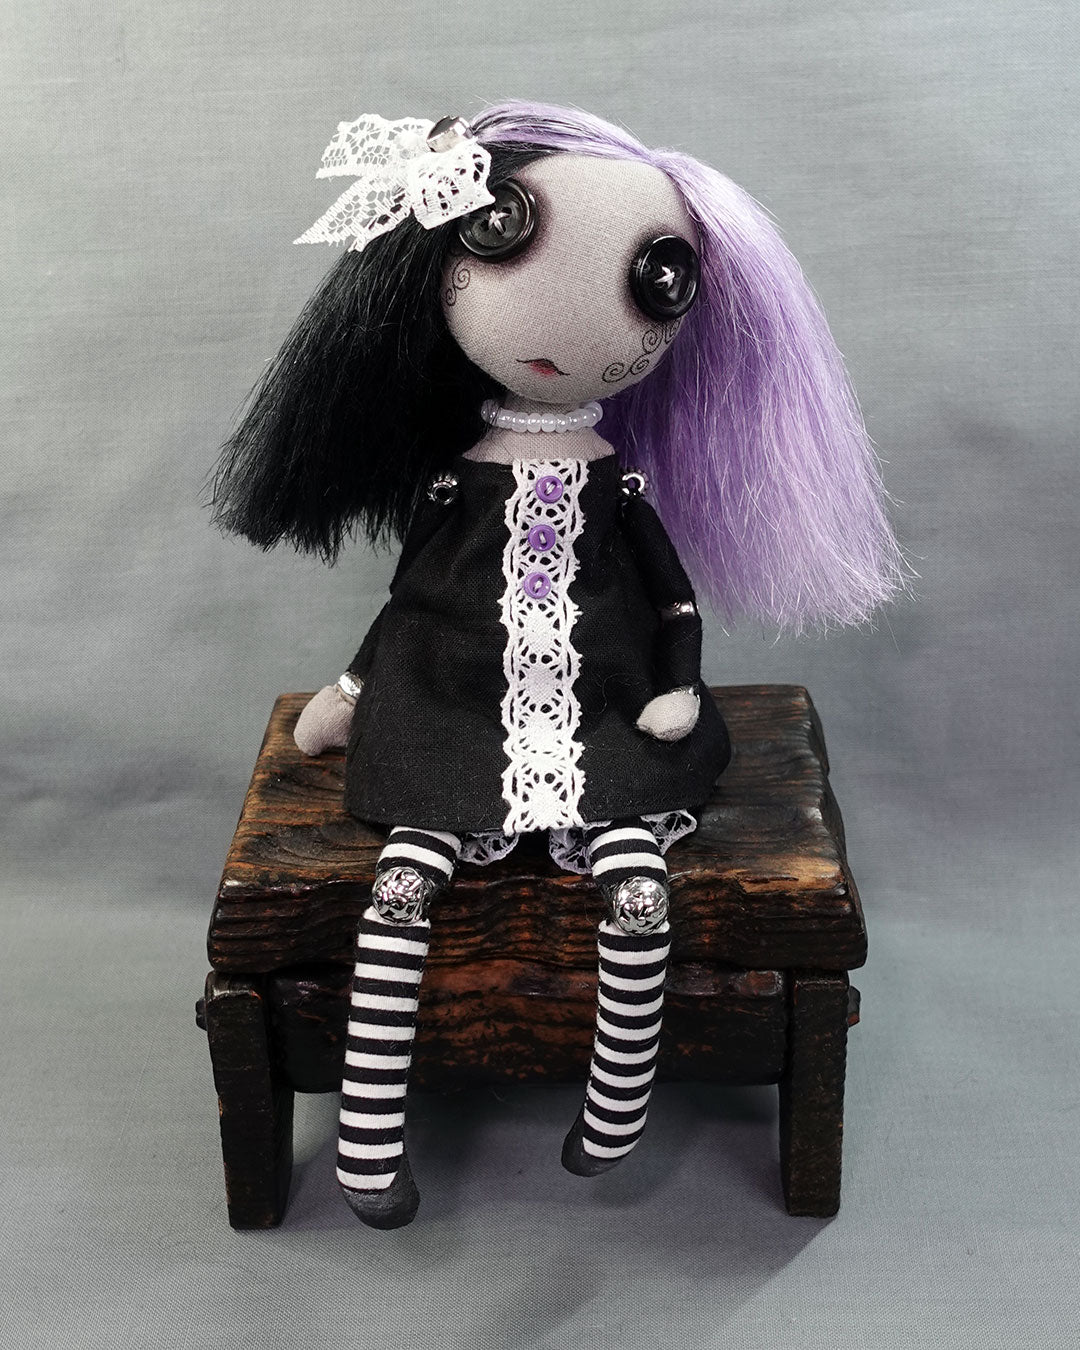 a button eyed gothic cloth art doll with purple and black hair